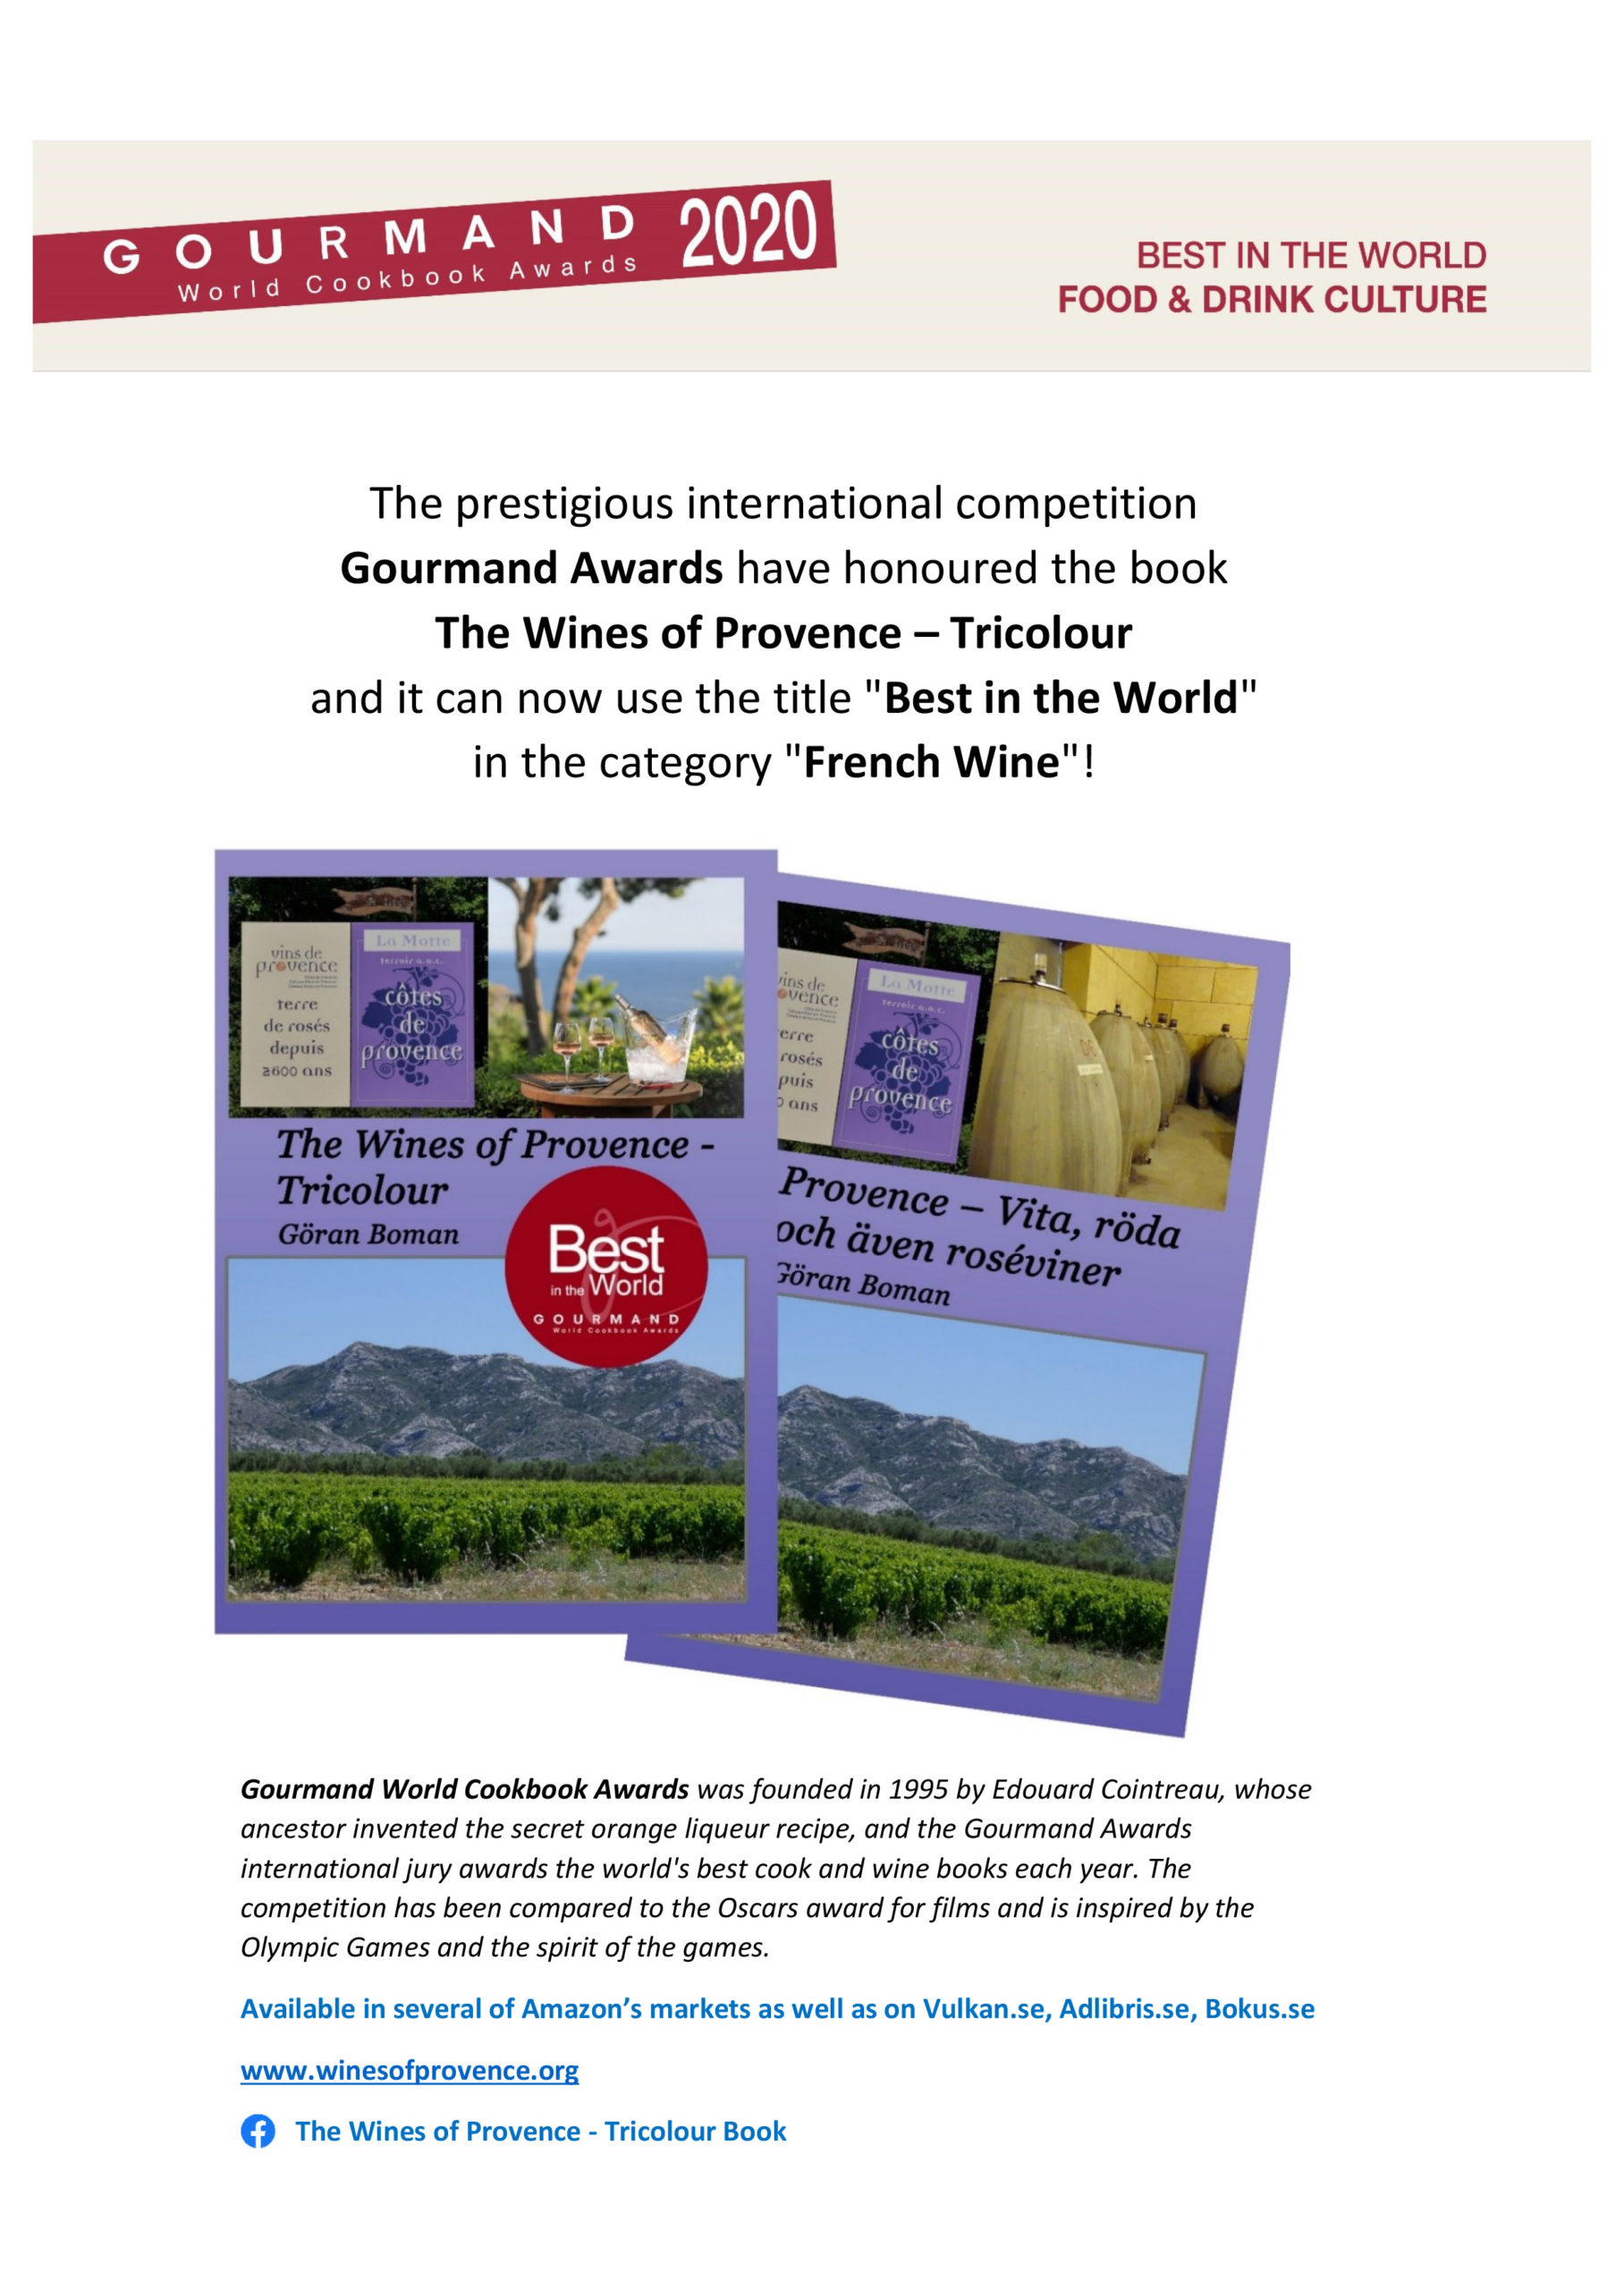 The Wines of Provence – Tricolour – Best in the World! | Wines of Provence